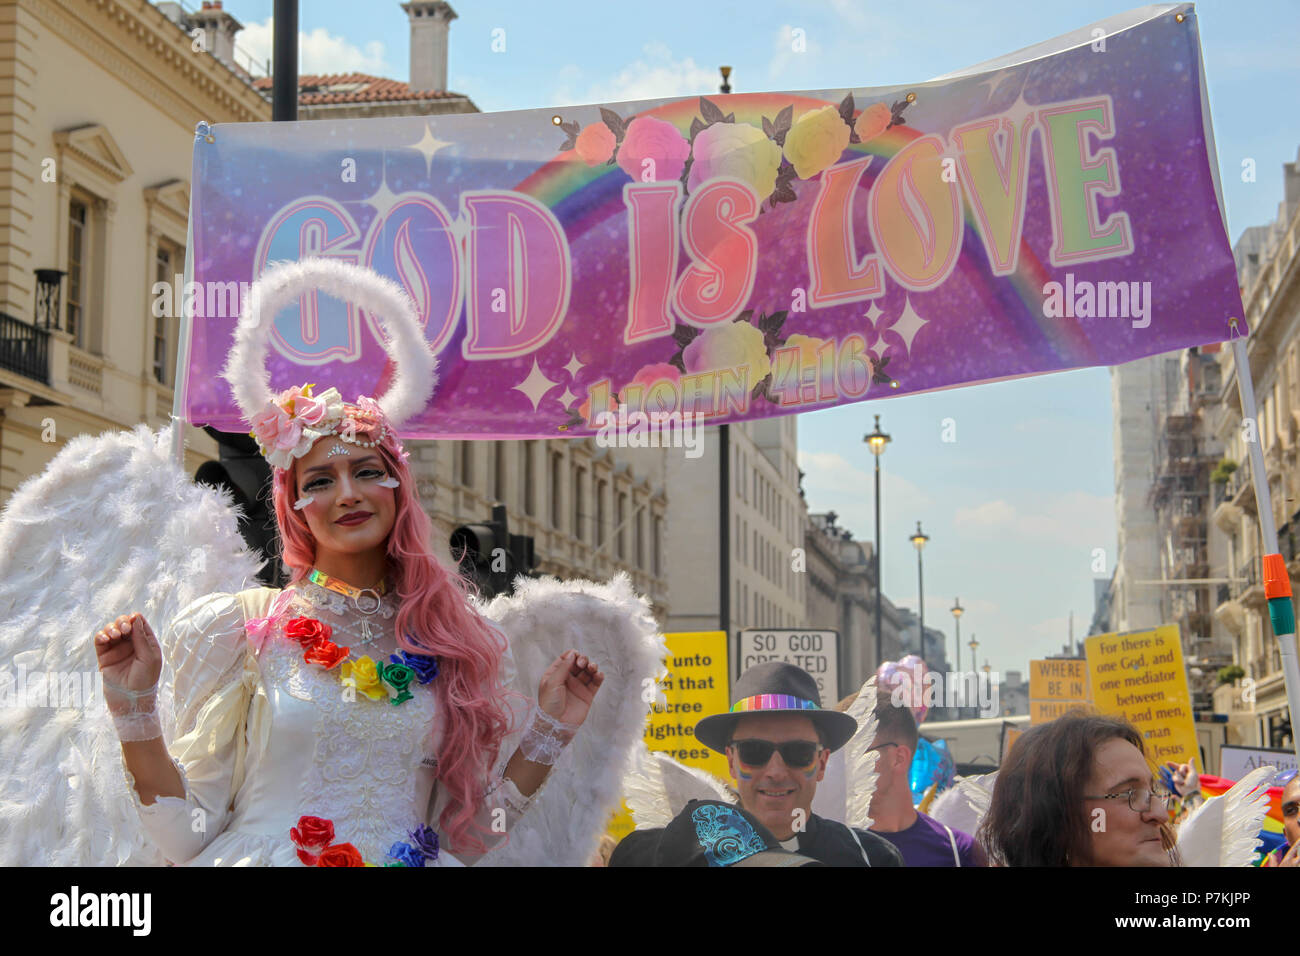 London, UK. 7th July 2018. Christian supporters of Pride in London Credit: Alex Cavendish/Alamy Live News Stock Photo